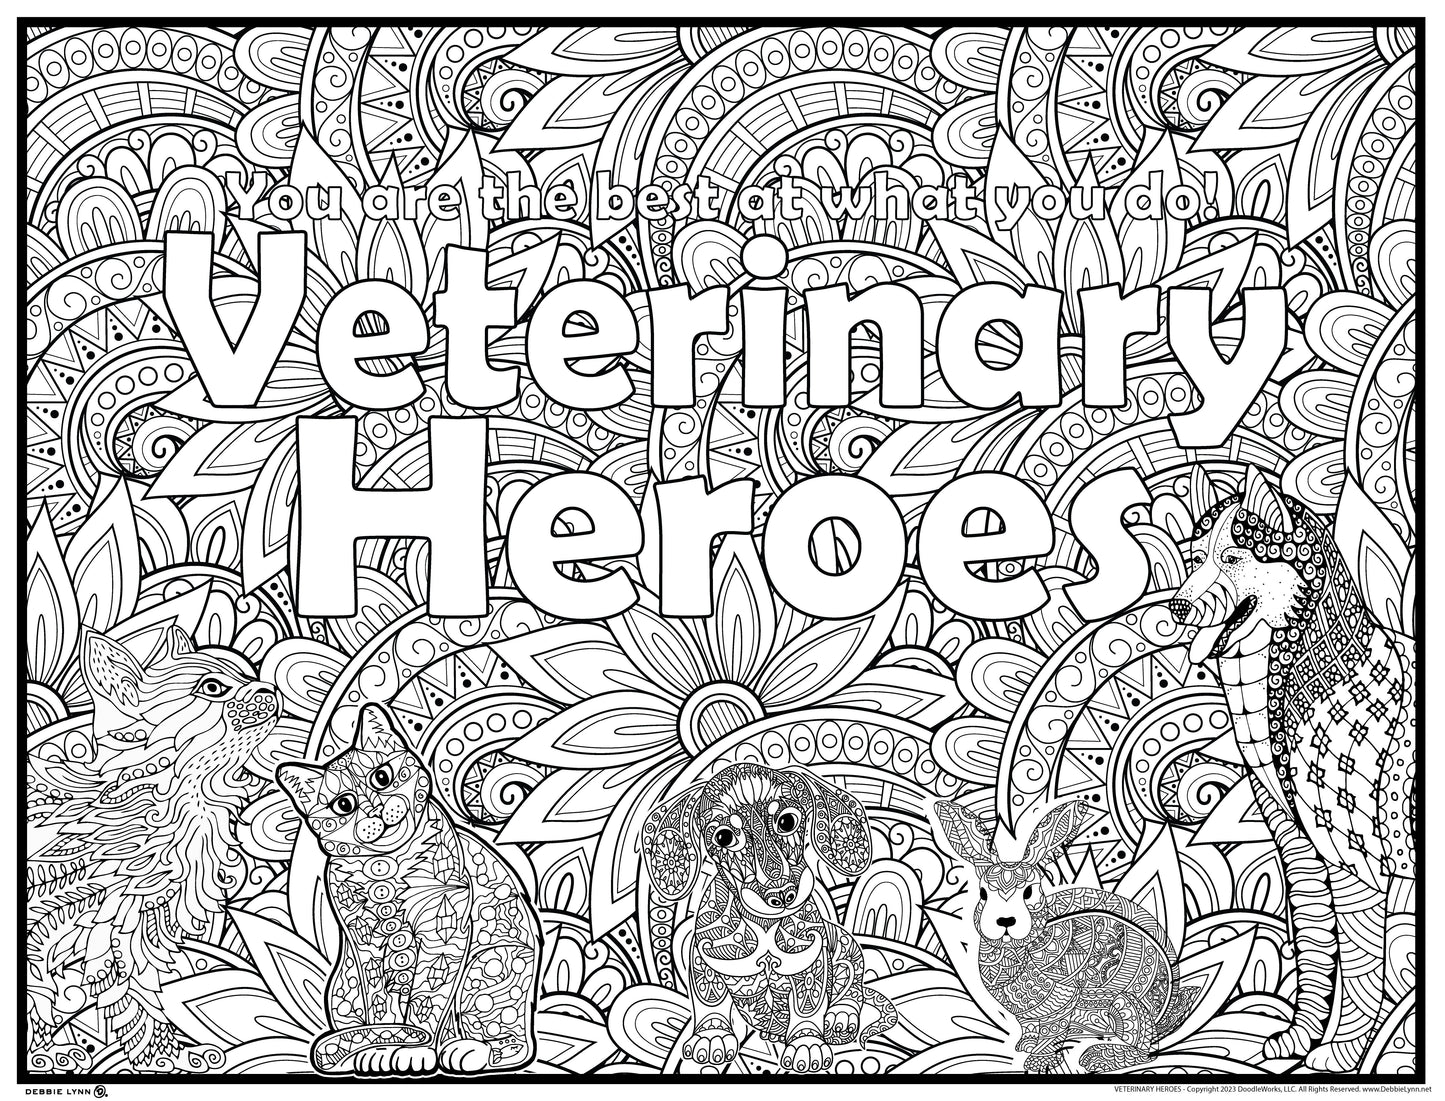 Veterinary Heroes Personalized Giant Coloring Poster 46" x 60"